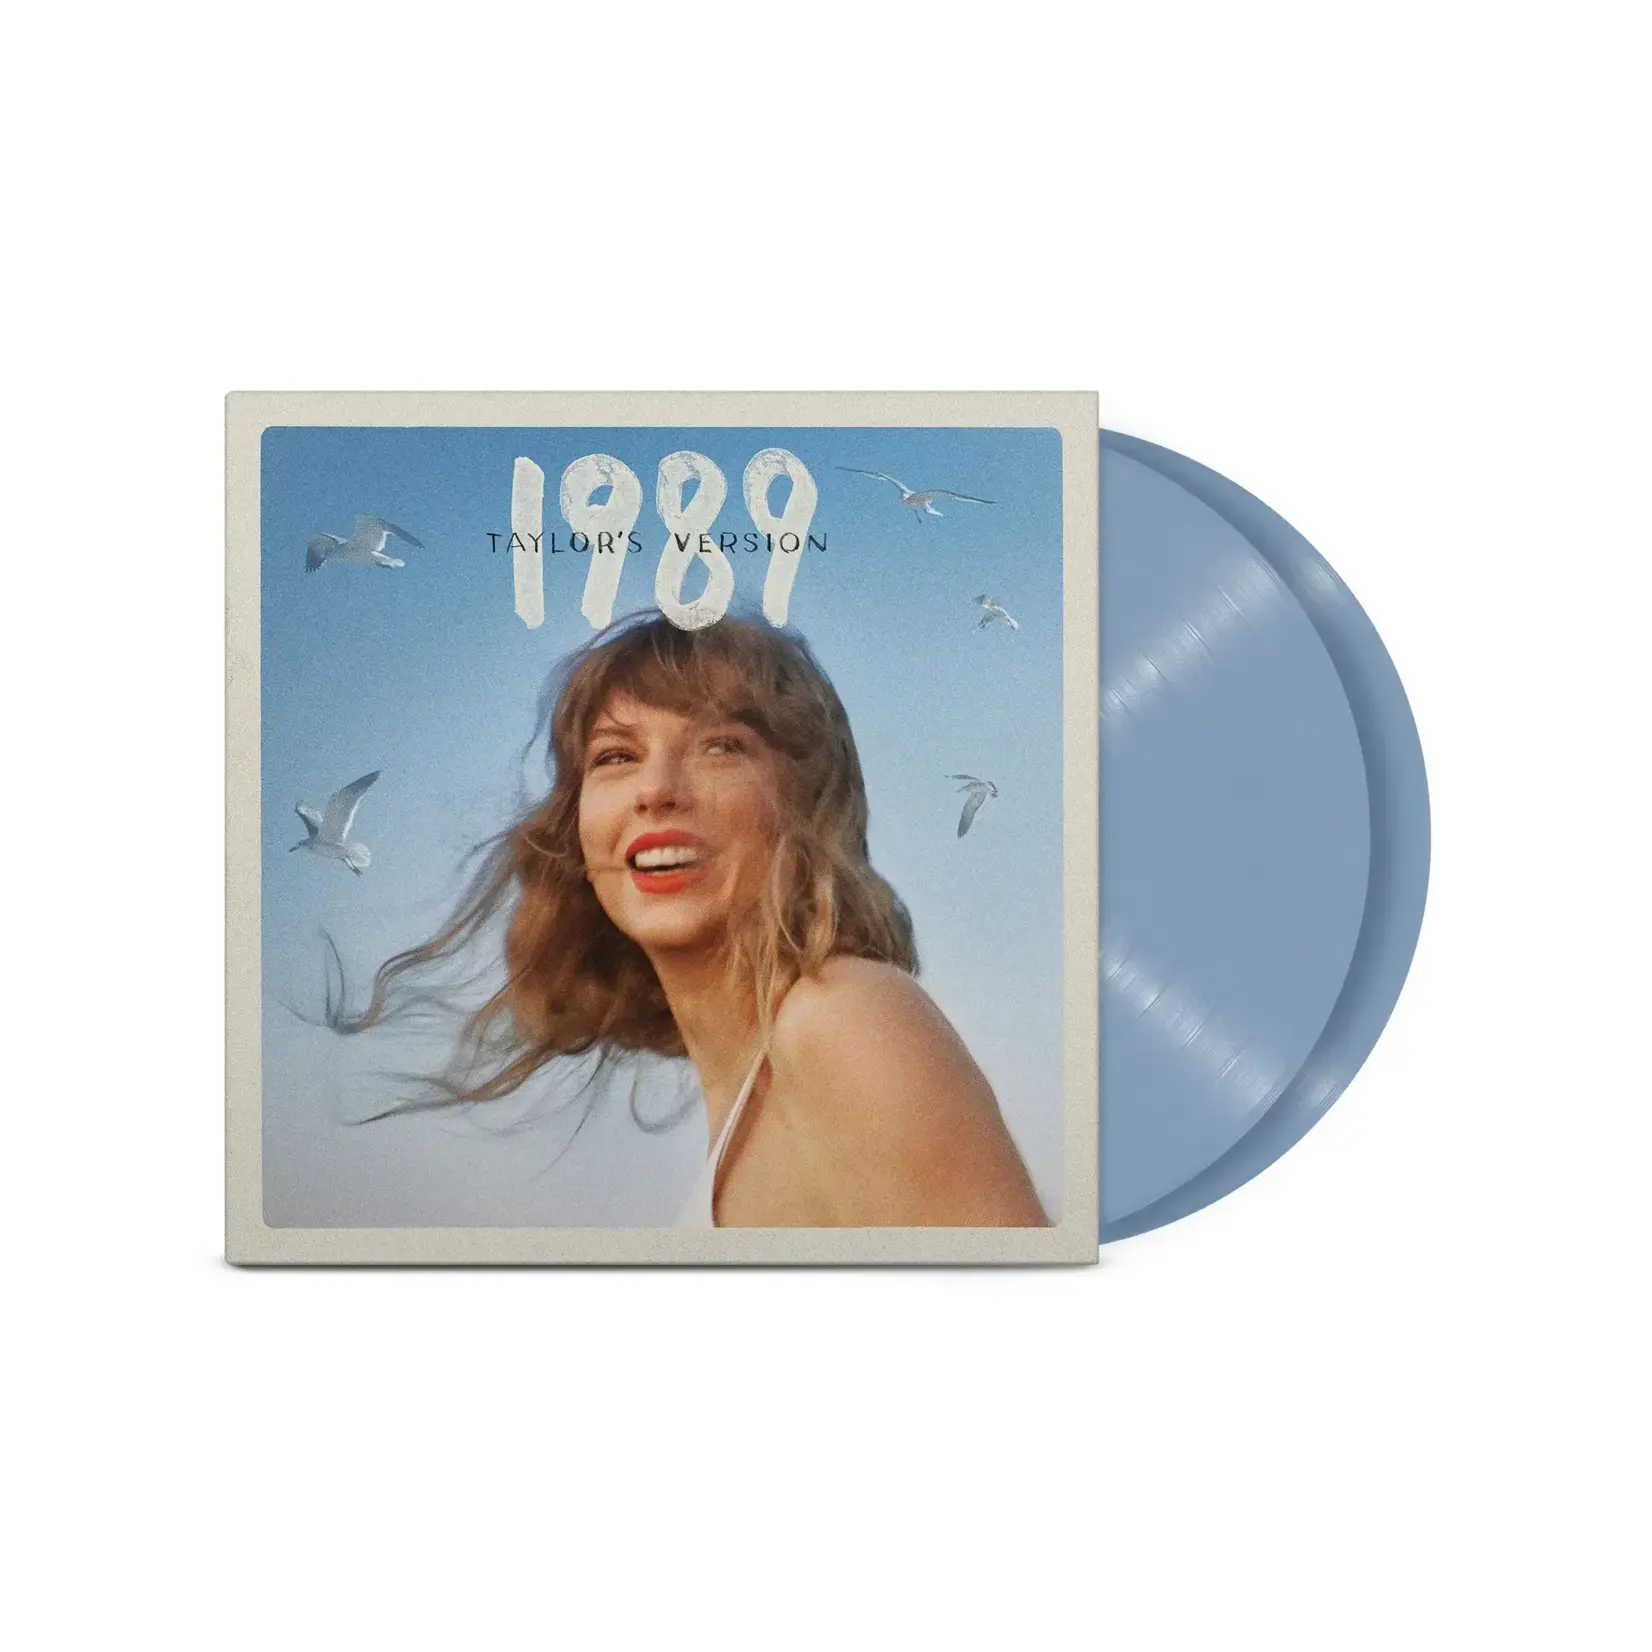 [New] Taylor Swift - 1989 - Taylor's Version (2LP, crystal skies blue edition)